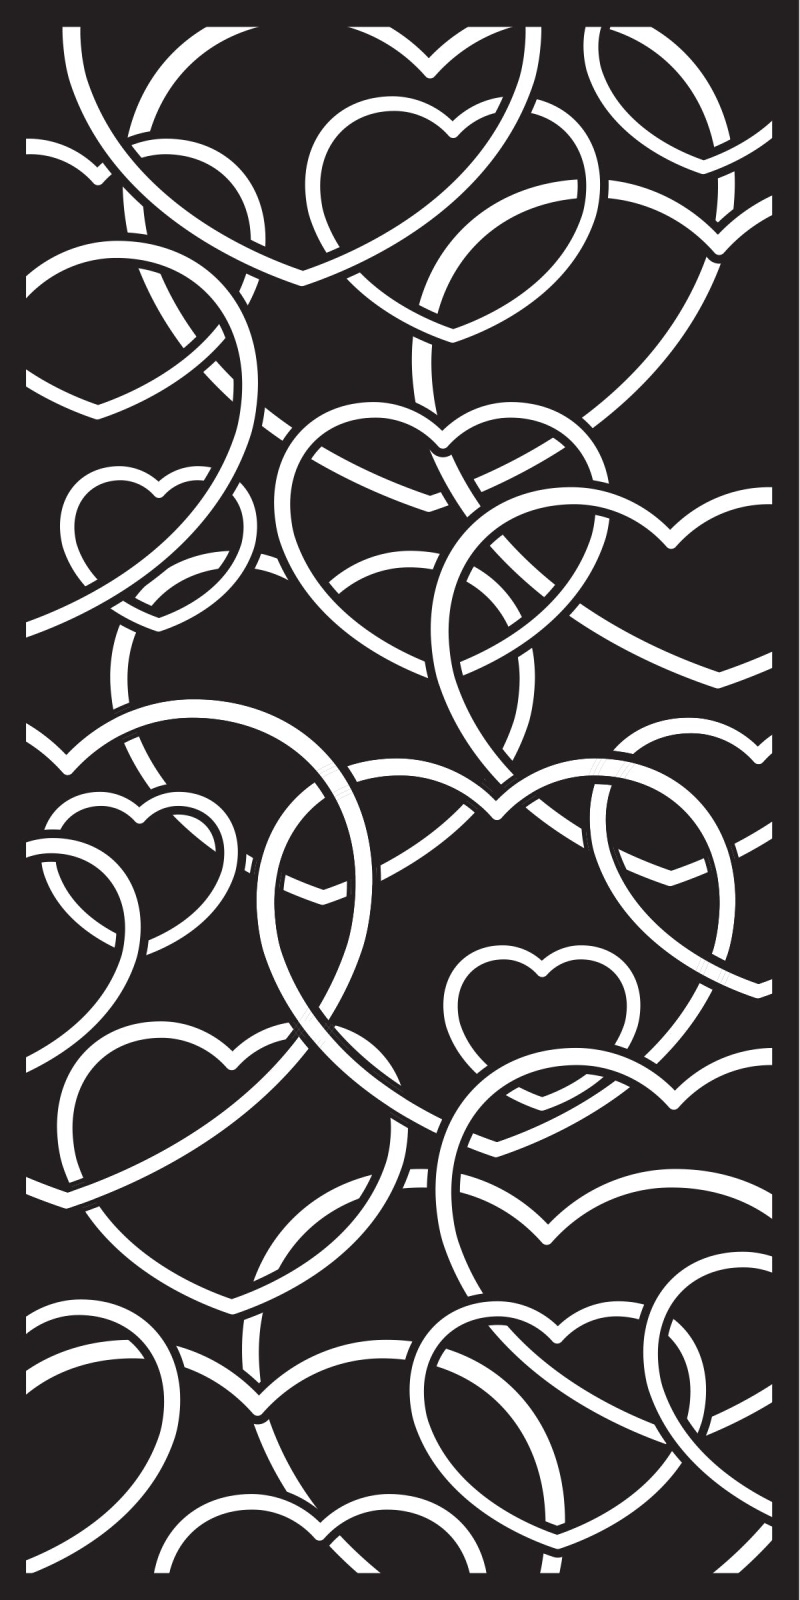 Creative Expressions Entwined Hearts Dl Stencil 4 In X 8 In (10.0 X 20.3 Cm)